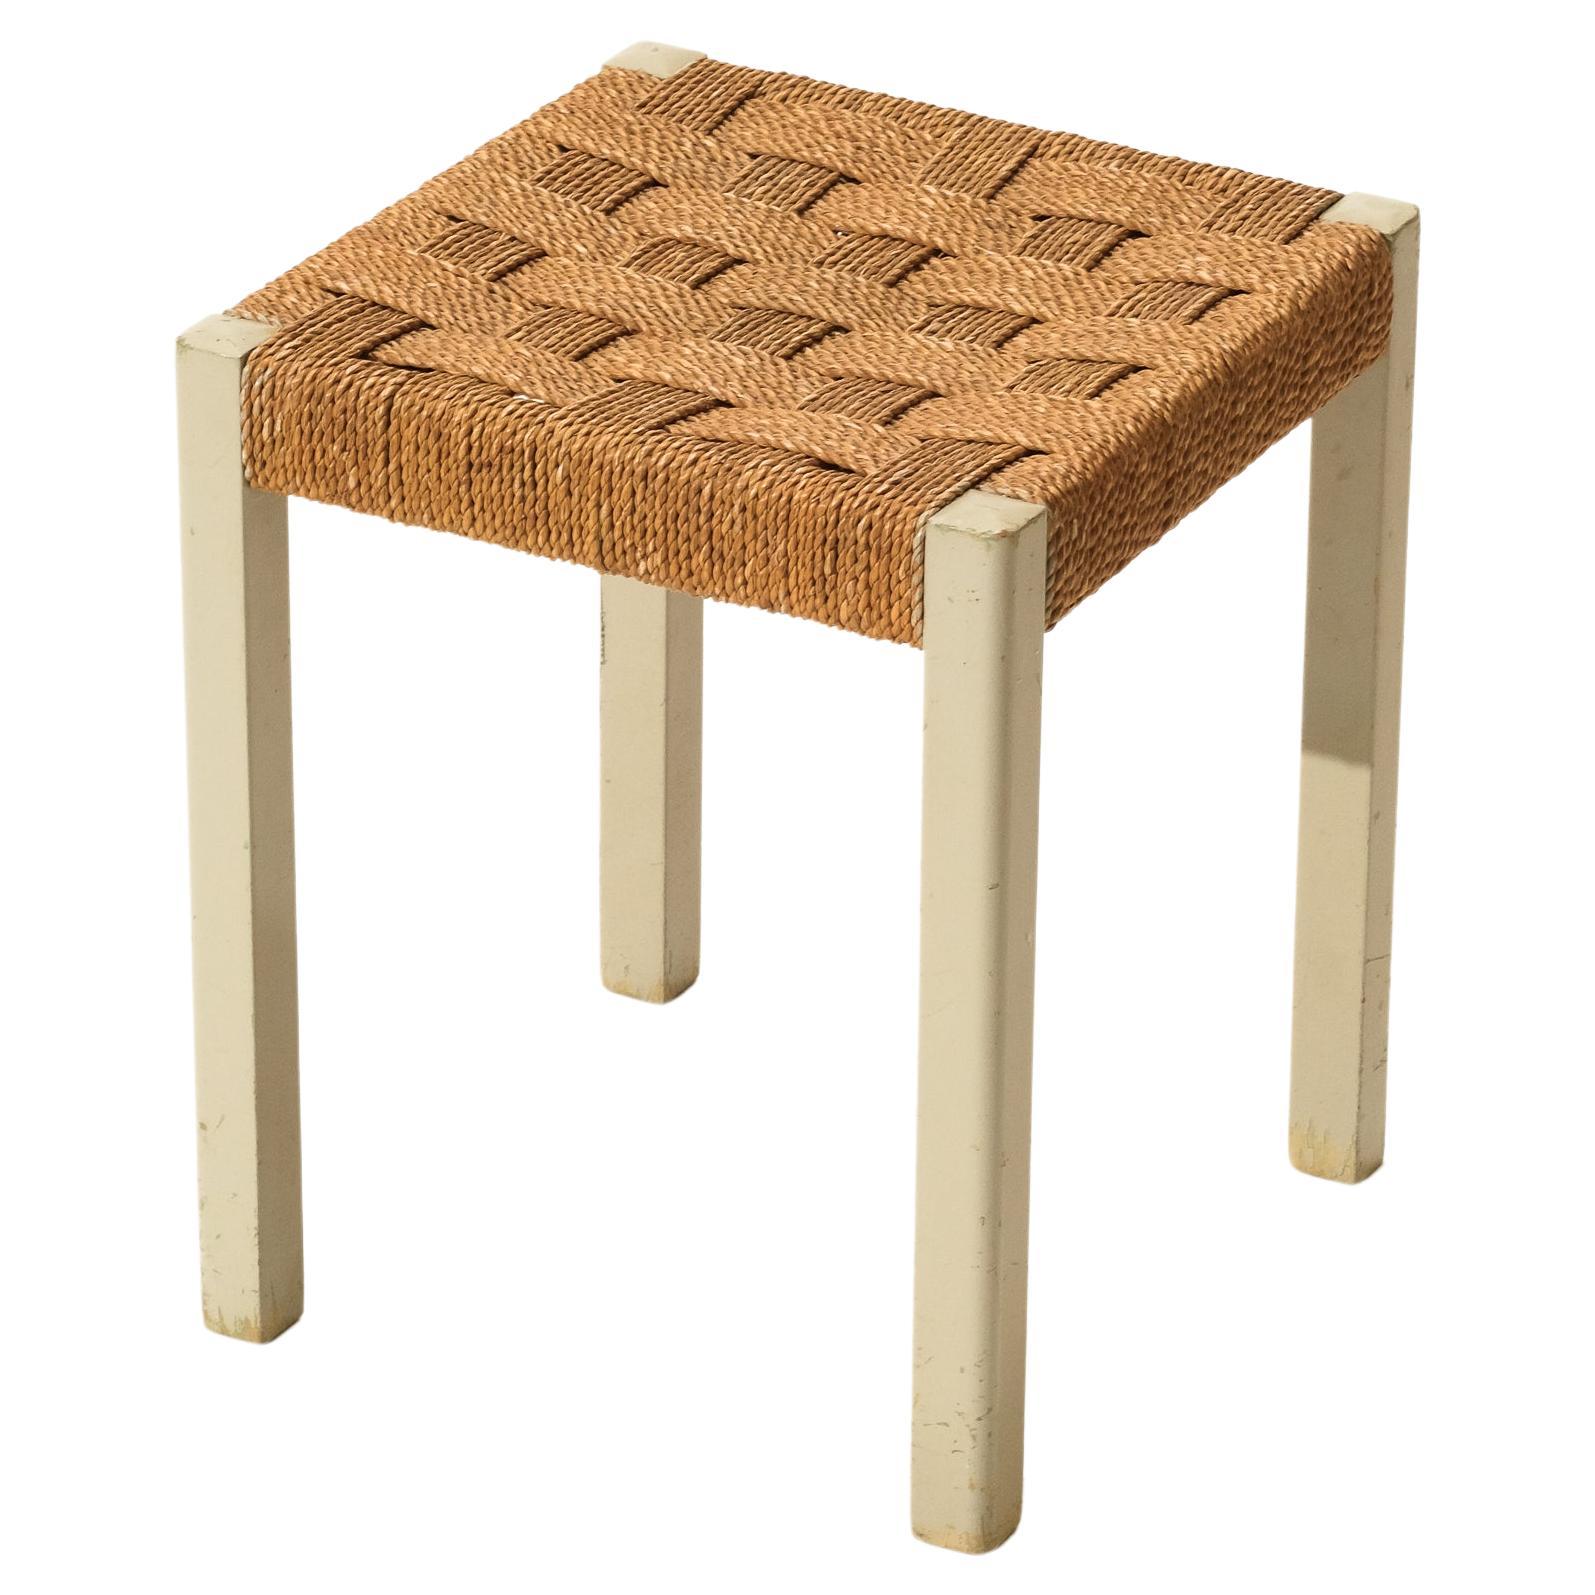 Woven Seagrass and Painted Wood Stool by Axel Larsson for Gemla, Sweden, 1940s For Sale